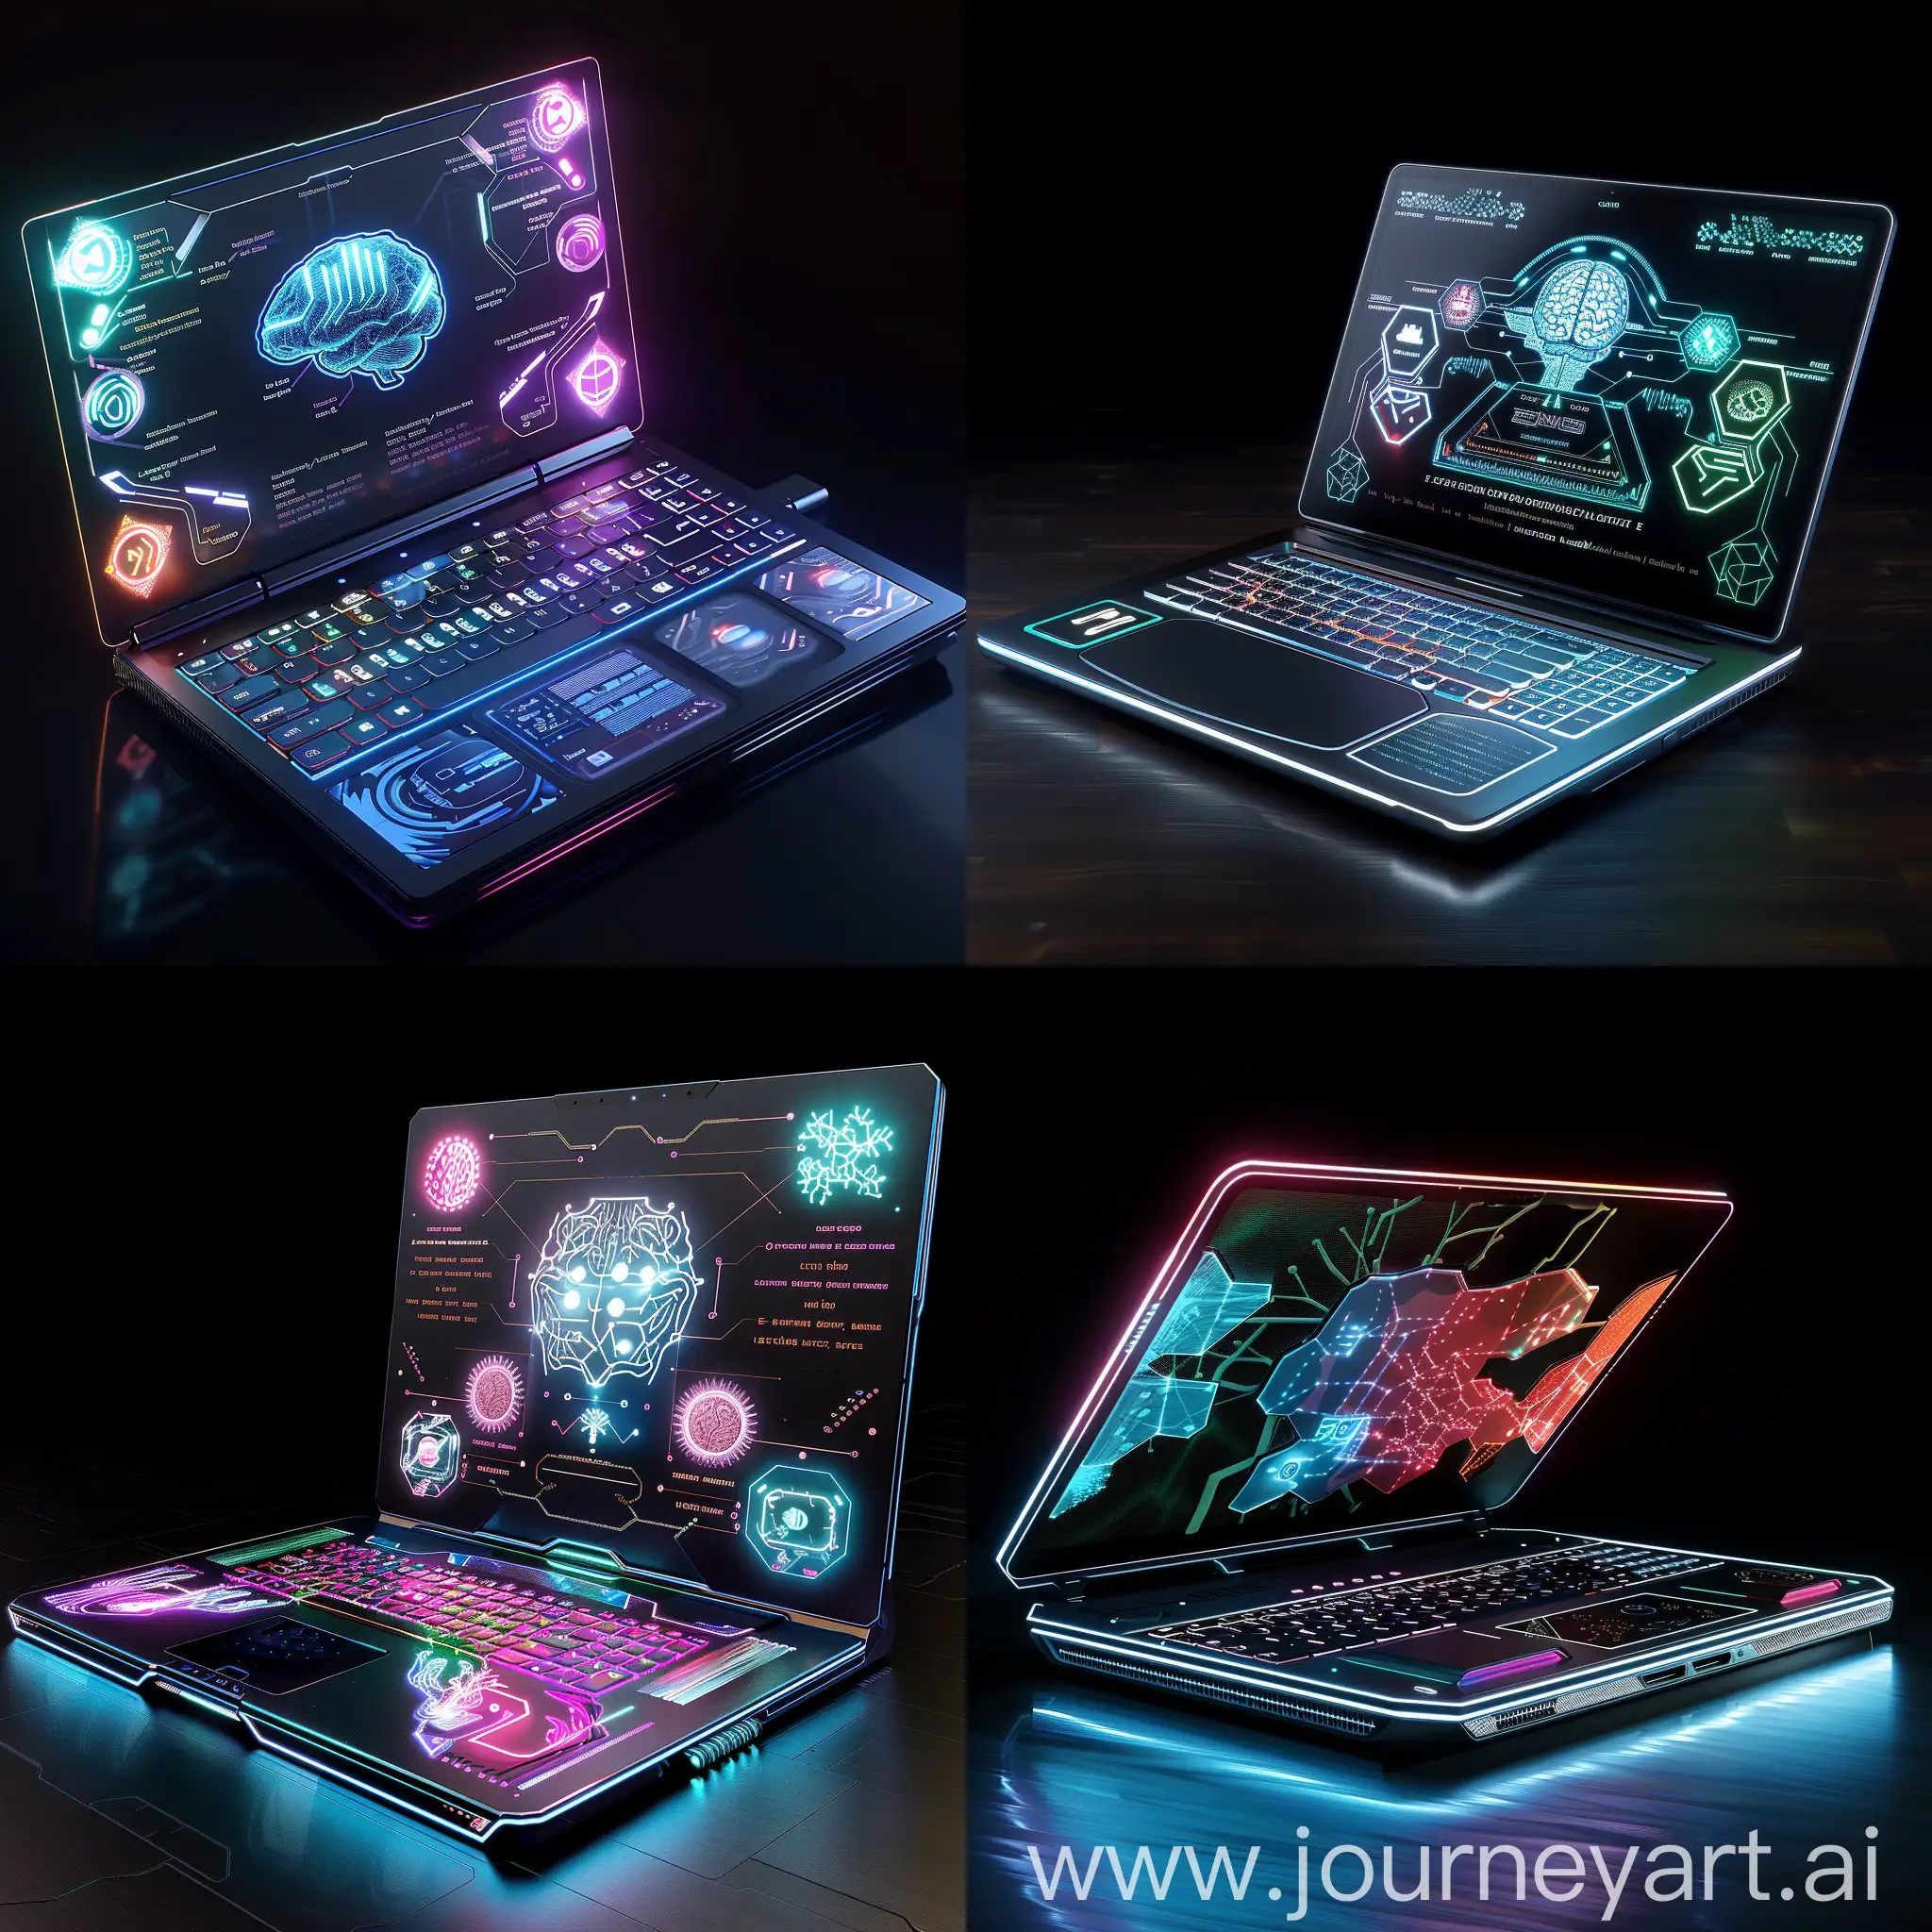 Futuristic laptop, in futuristic style, Quantum Computing Processor, Graphene-based Cooling System, Neural Processing Unit (NPU), Optical Computing Components, Biological Data Storage, 5G/6G Connectivity, Nanotechnology Batteries, 3D Stacked Memory, Flexible OLED Display, Brain-Computer Interface (BCI), Holographic Display, Augmented Reality (AR) Projection, Dynamic E-Ink Keyboard, Biometric Security Sensors, Modular Expansion Ports, Wireless Charging Pad, Electroluminescent Body, Gesture Control Sensors, Environmental Sensors, Self-Healing Materials, Shape Memory Alloys (SMA) for Flexibility, Self-Healing Polymers for Durability, Piezoelectric Energy Harvesting, Thermoelectric Generators for Waste Heat Recovery, Electrochromic Displays, Magnetorheological Fluid Damping, Photochromic Light Filtering, Smart Thermal Conductive Materials, Ionic Conductors for Rapid Charging, Magnetostrictive Actuators for Haptic Feedback, Smart Fabric Exterior, Shape-Memory Alloy Hinges, Self-Repairing Shell, Electrochromic Surface, Thermochromic Touchpad, Piezoelectric Speaker Grilles, Shape-Shifting Ports. Photochromic Bezels, Magnetic Levitation Feet, Hydrochromic Logo, unreal engine 5 --stylize 1000